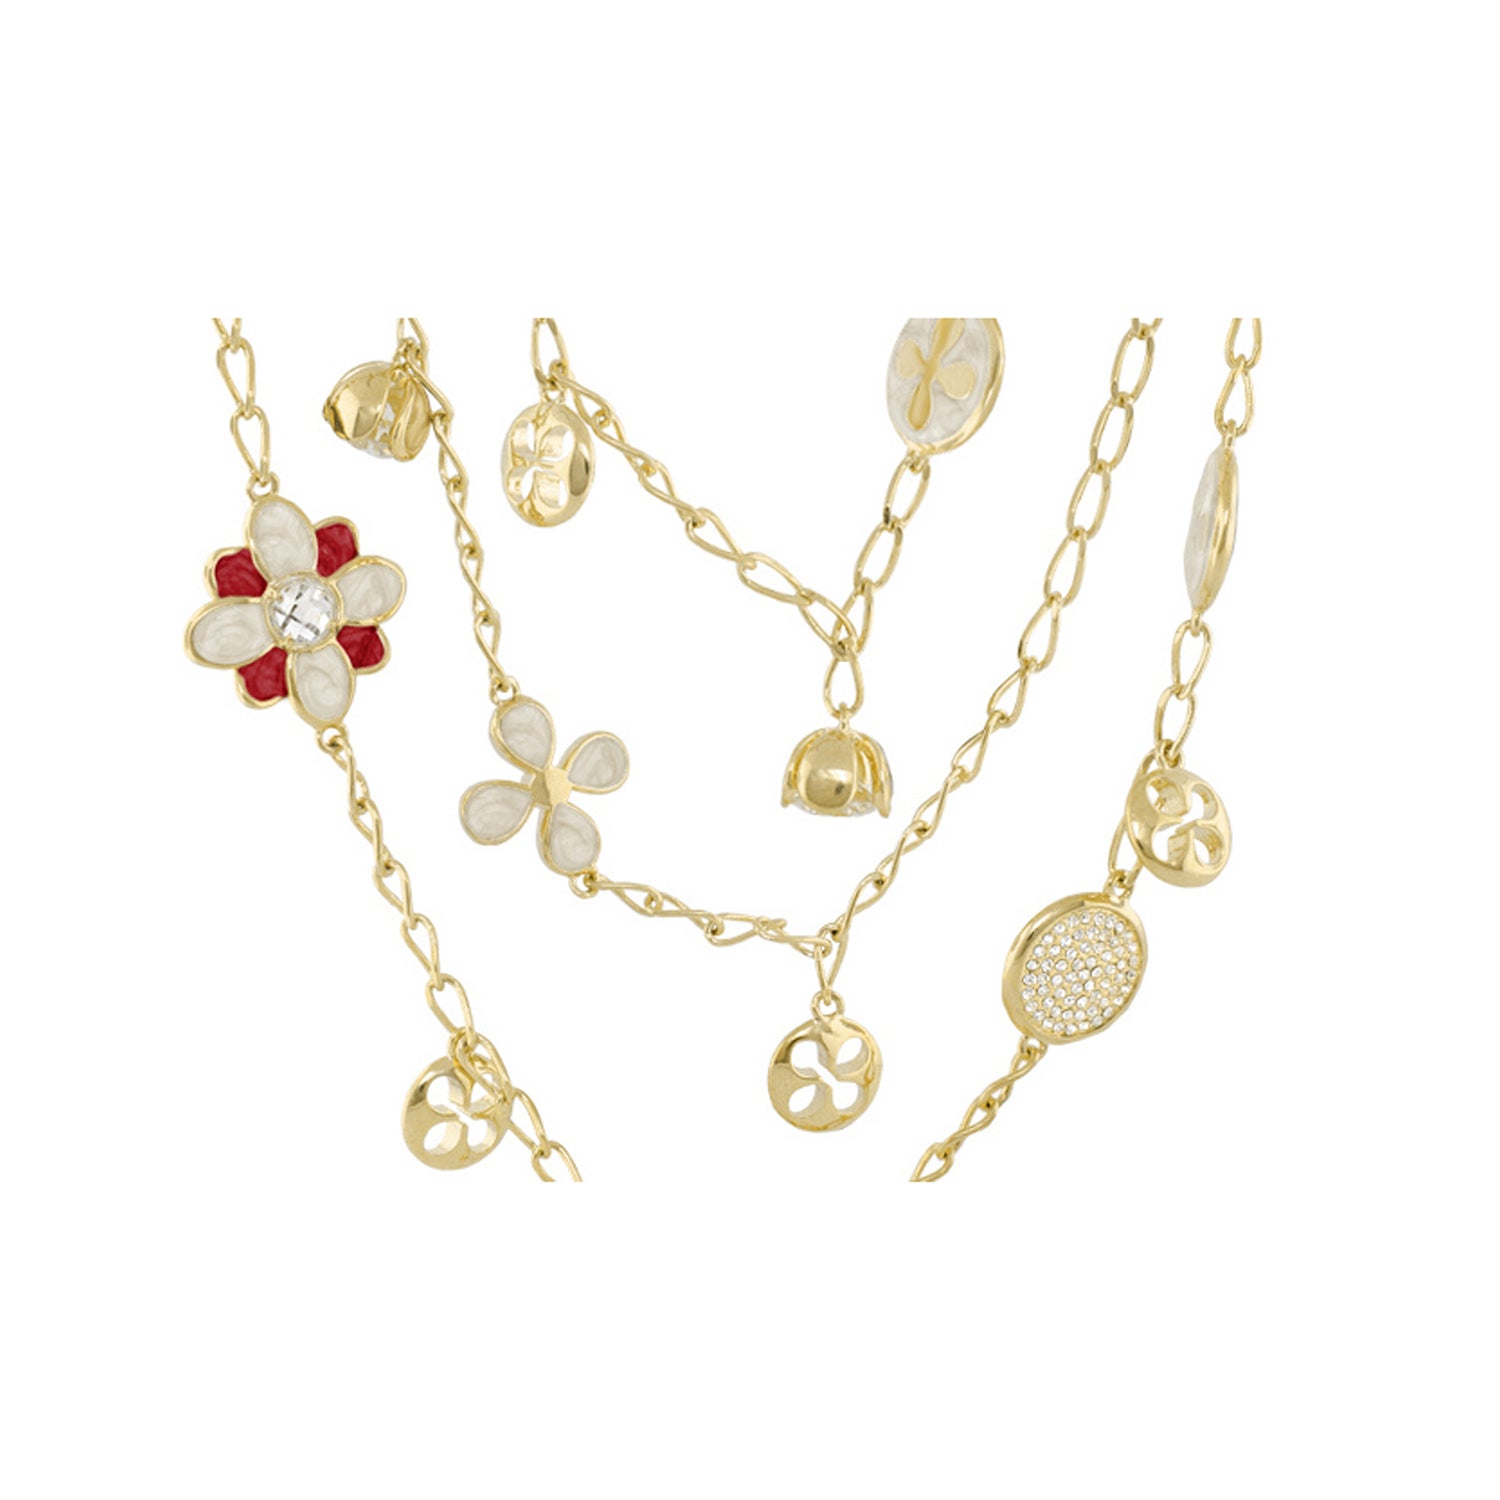 Louis Vuitton Blooming Supple Necklace - Brass Station, Necklaces